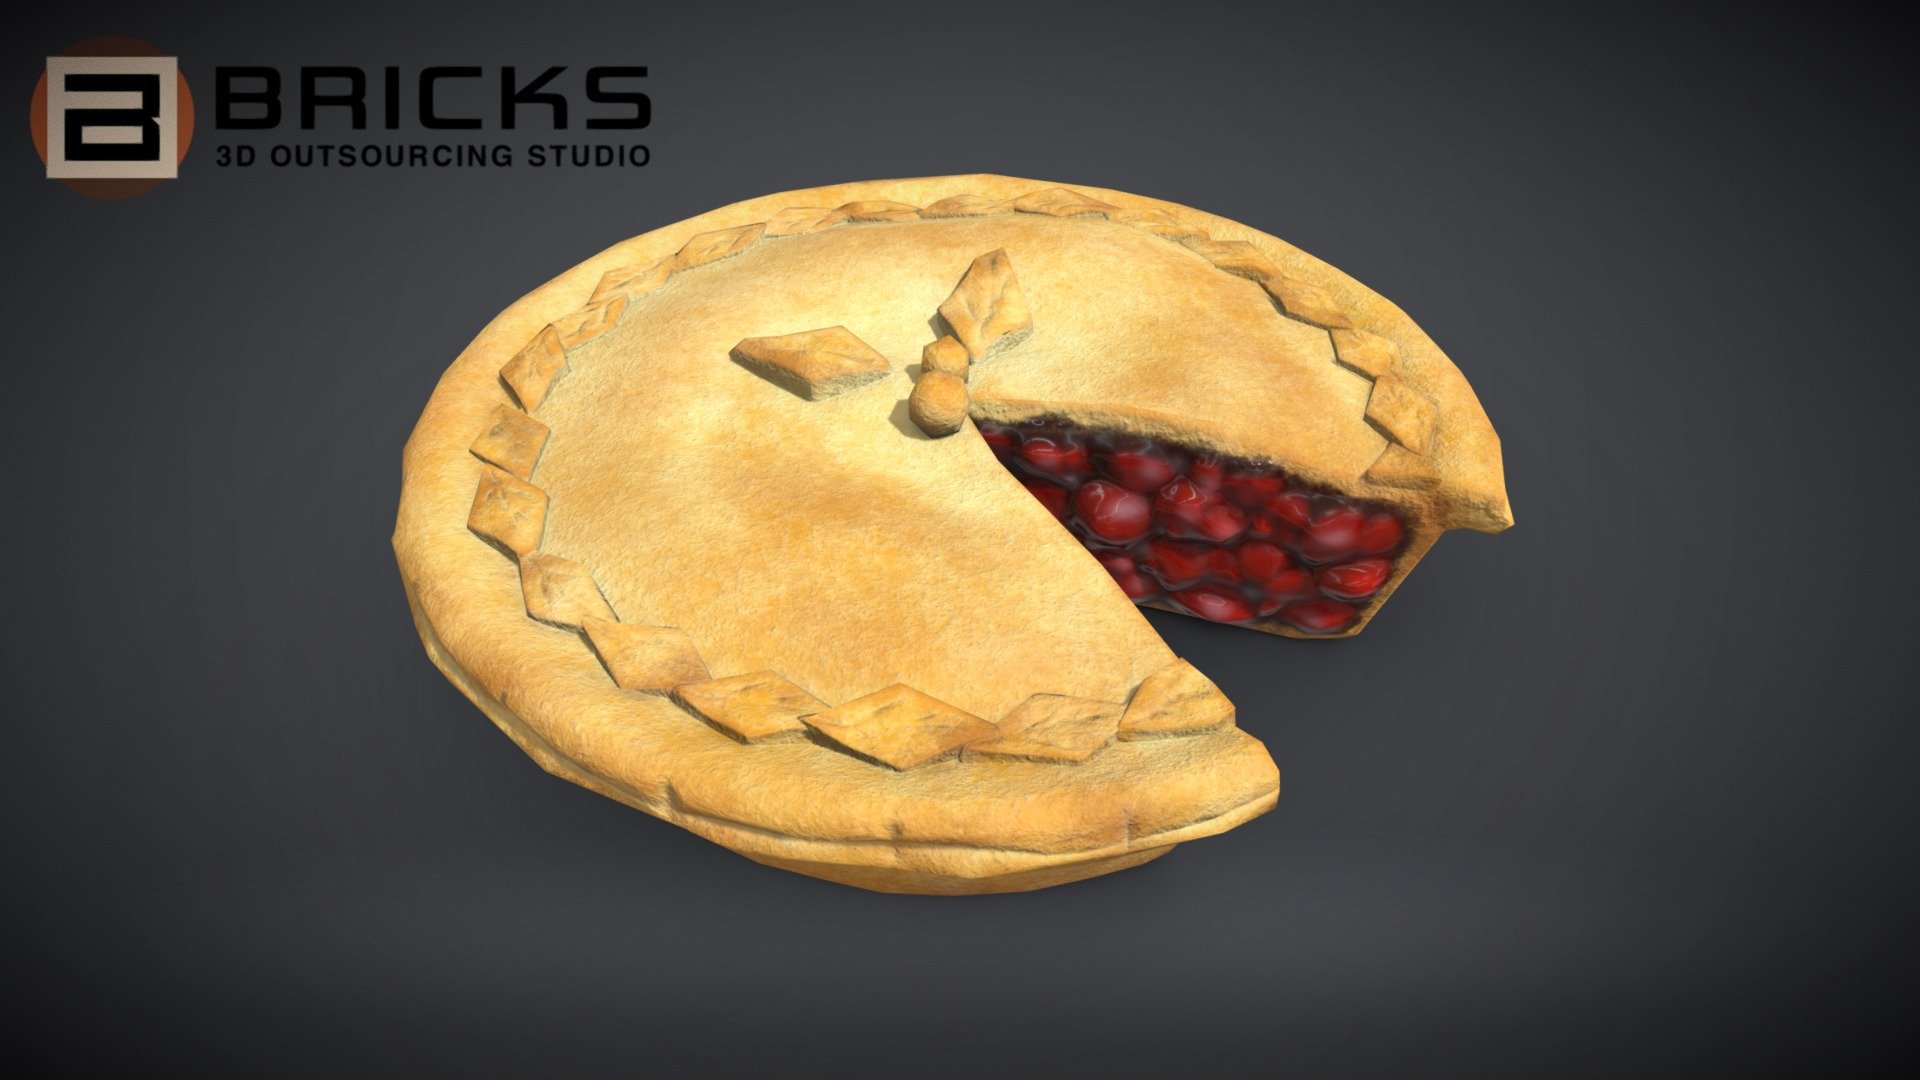 PBR Food Asset:
CherryPieChart
Polycount: 1588
Vertex count: 796
Texture Size: 2048px x 2048px
Normal: OpenGL

If you need any adjust in file please contact us: team@bricks3dstudio.com

Hire us: tringuyen@bricks3dstudio.com
Here is us: https://www.bricks3dstudio.com/
        https://www.artstation.com/bricksstudio
        https://www.facebook.com/Bricks3dstudio/
        https://www.linkedin.com/in/bricks-studio-b10462252/ - CherryPieChart - Buy Royalty Free 3D model by Bricks Studio (@bricks3dstudio) 3d model